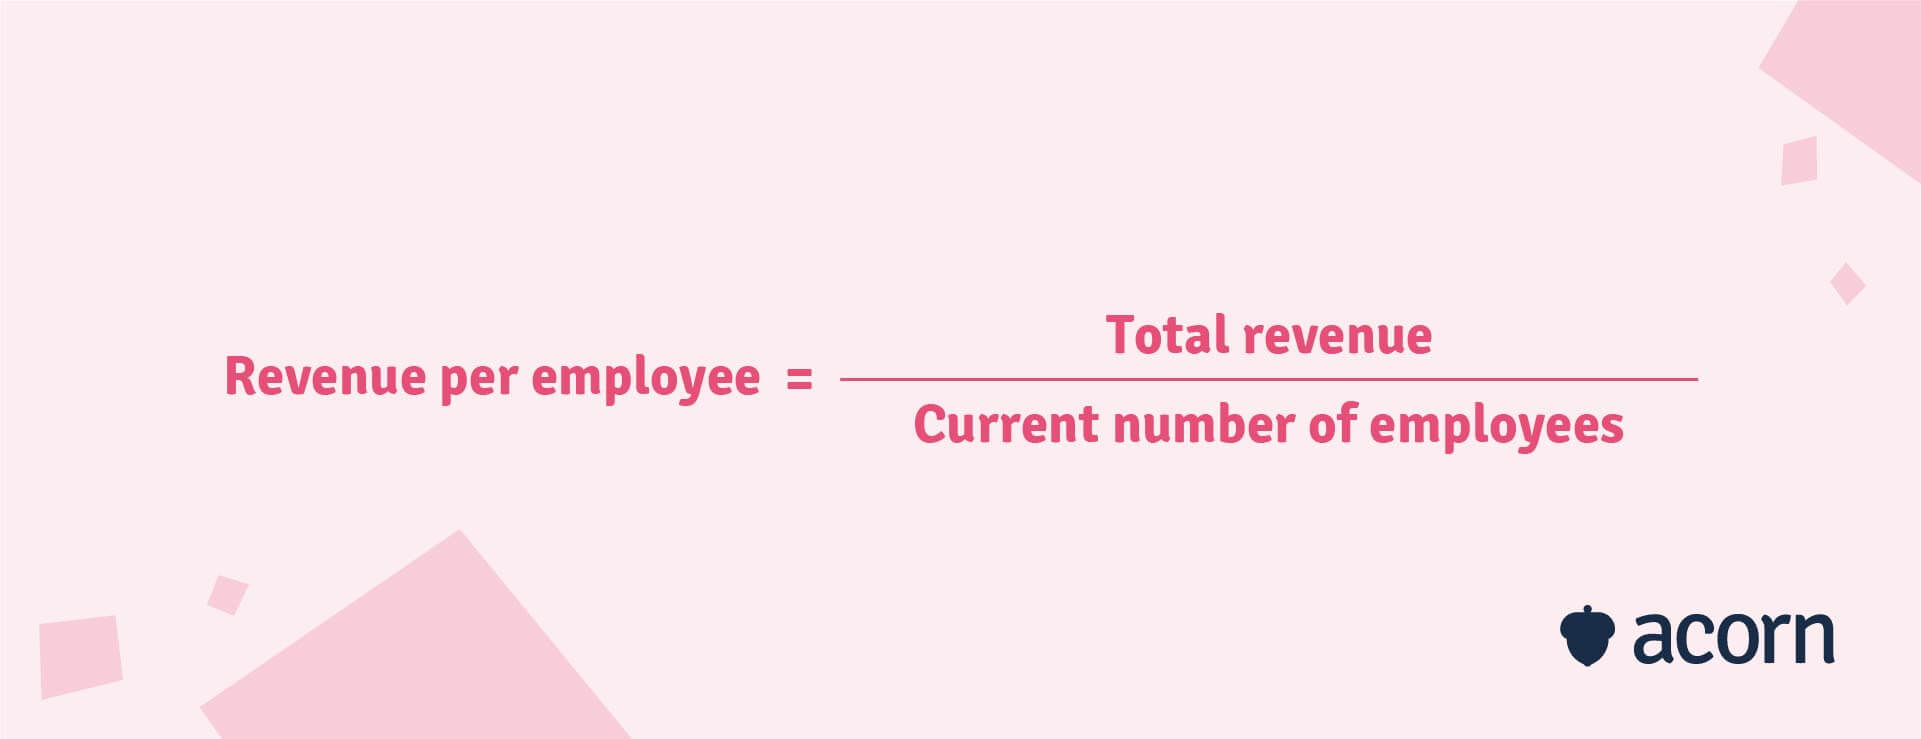 Revenue per employee = Total revenue / Current number of employees